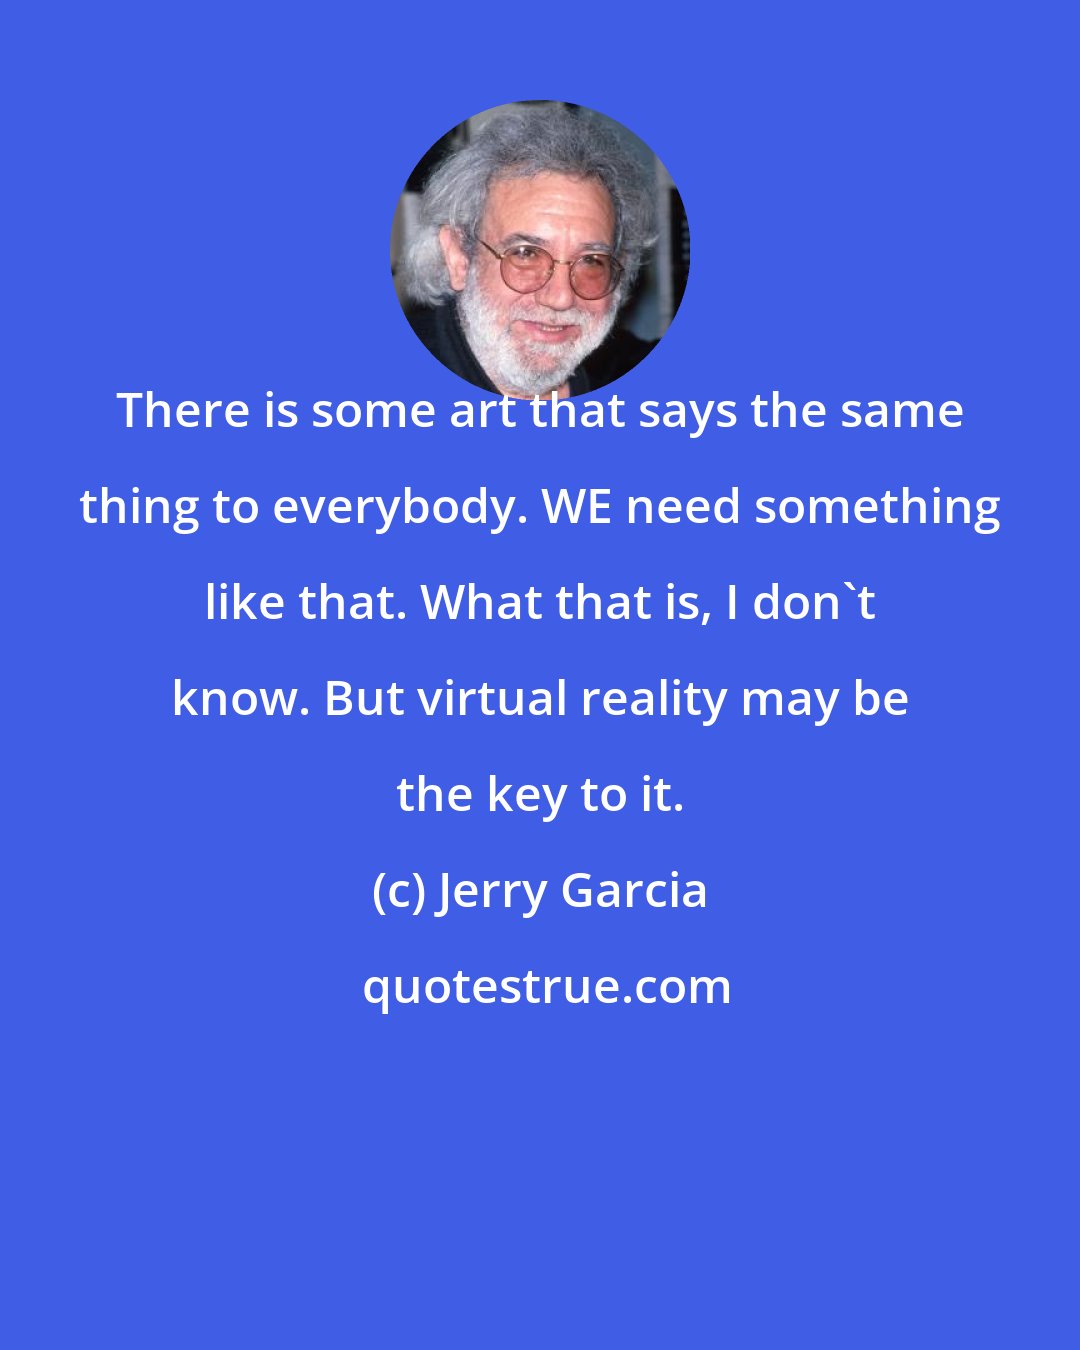 Jerry Garcia: There is some art that says the same thing to everybody. WE need something like that. What that is, I don't know. But virtual reality may be the key to it.